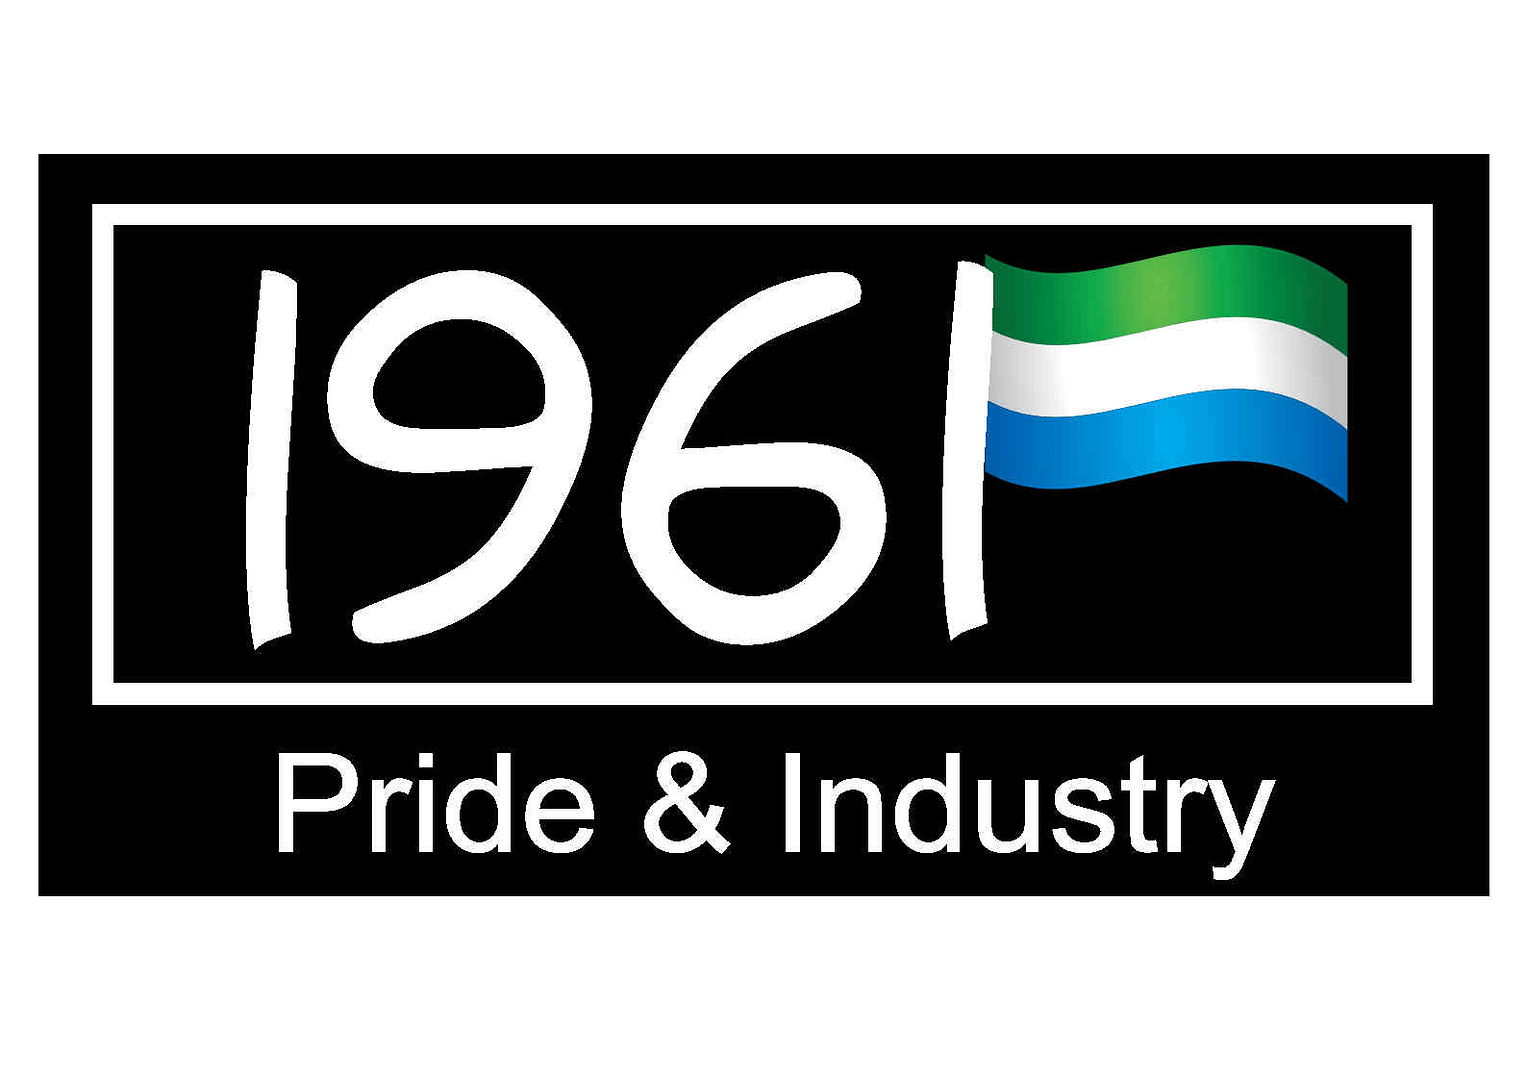 1961: Pride and Industry